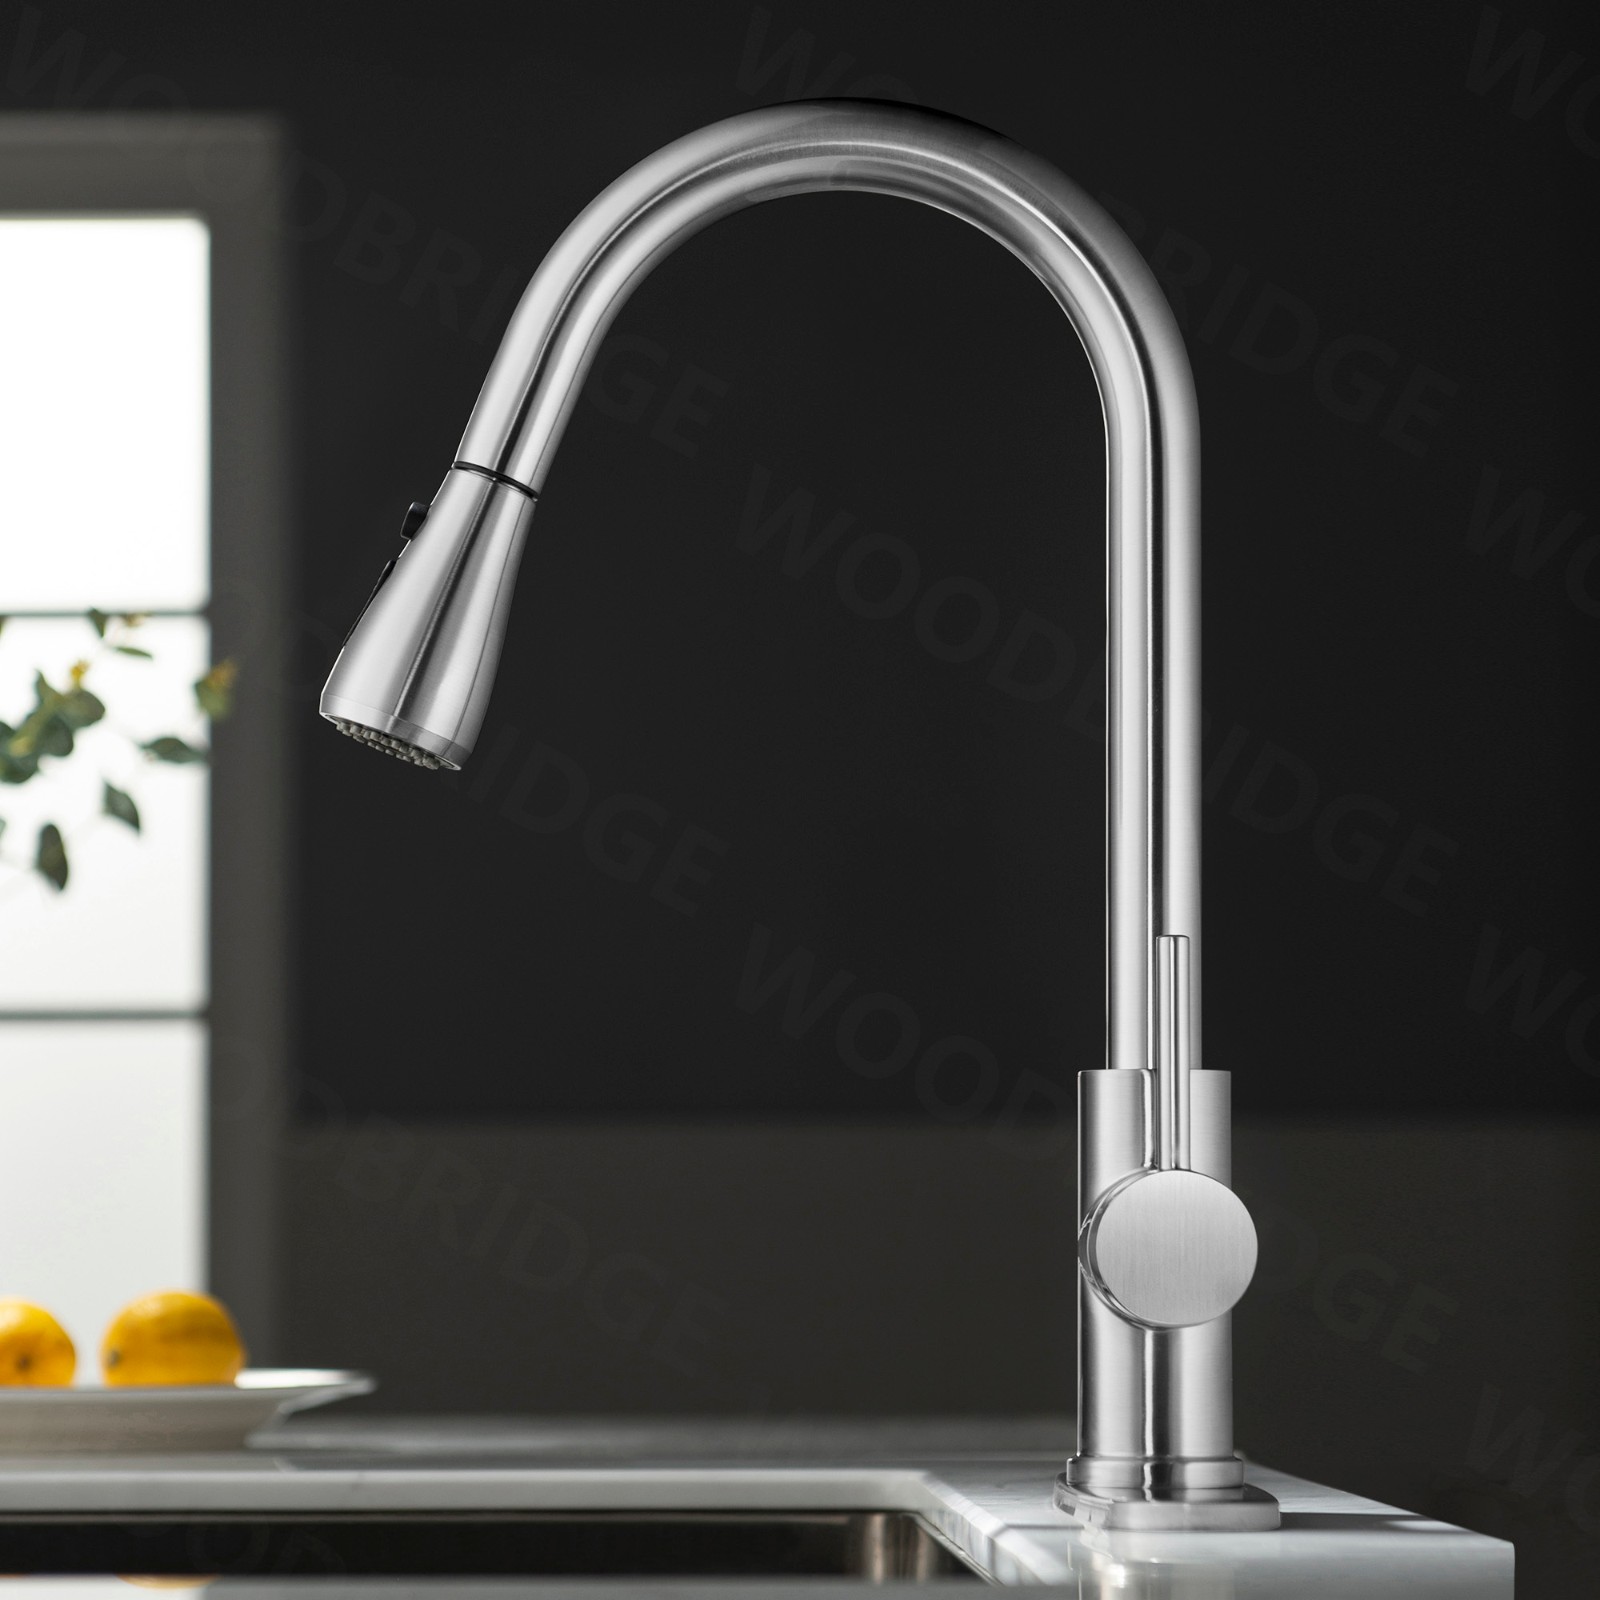  WOODBRIDGE WK090802CH Single Handle Pull Down Kitchen Faucet in Polished Chrome Finish._5025